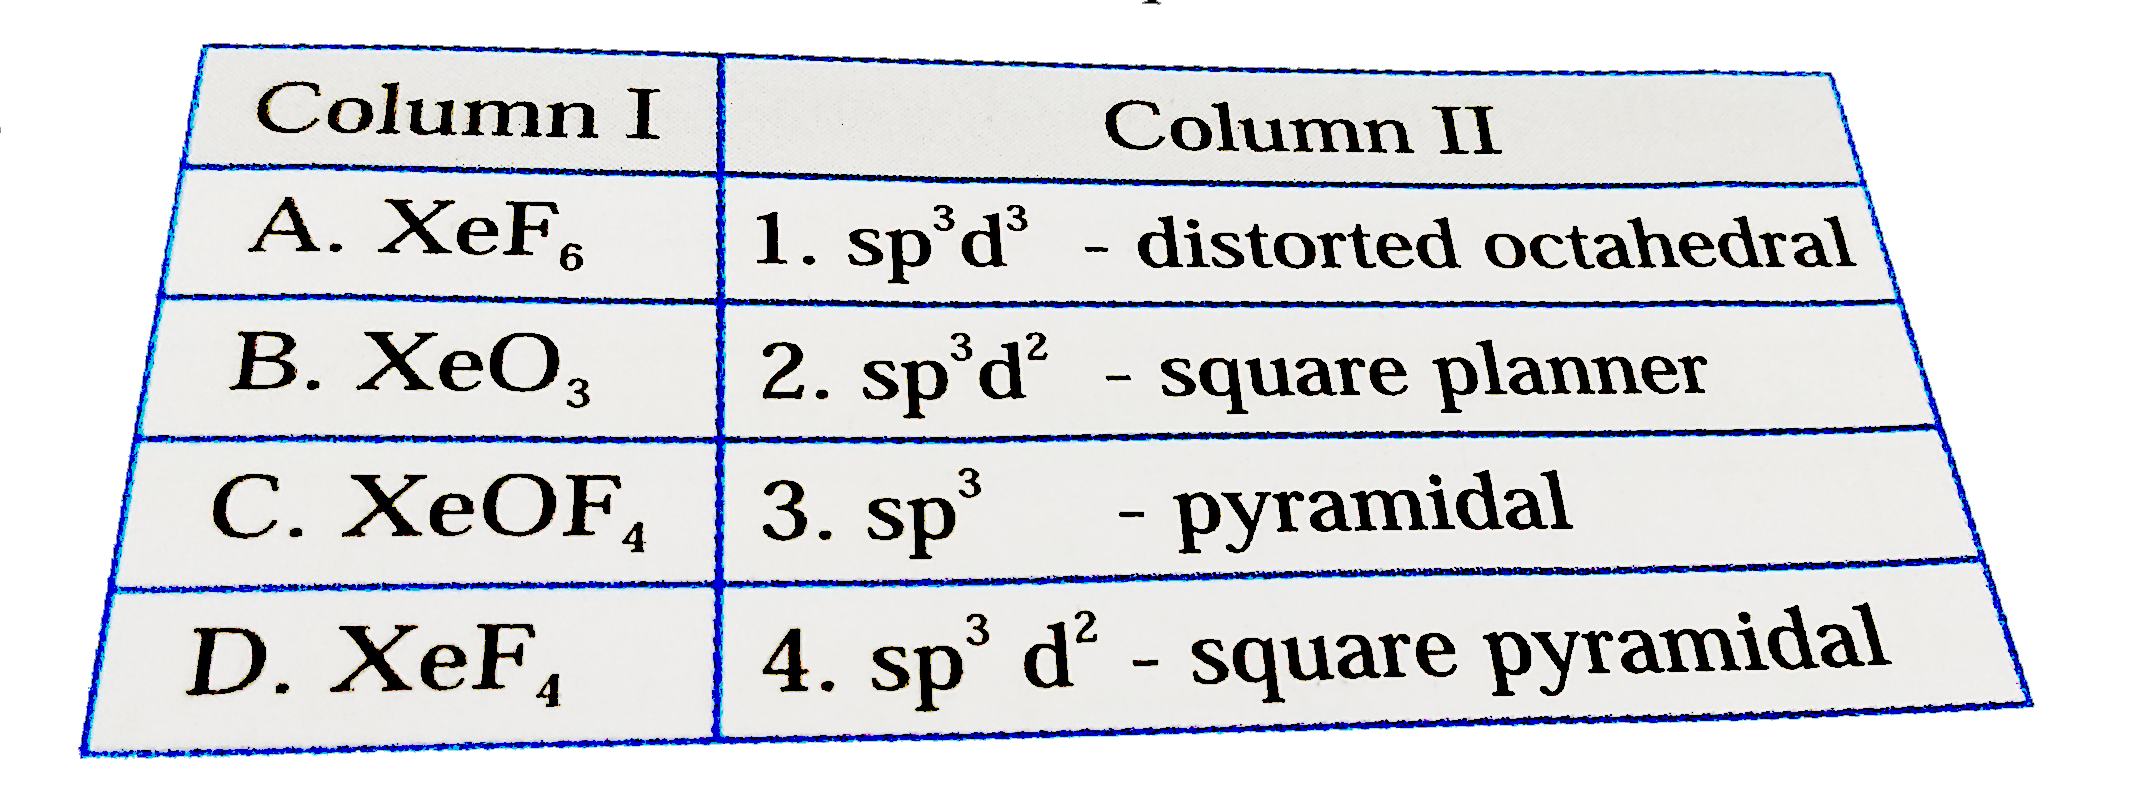 Match the compounds give in Column I with the hybridisation an shape given in Column II and mark the correct option.      Codes